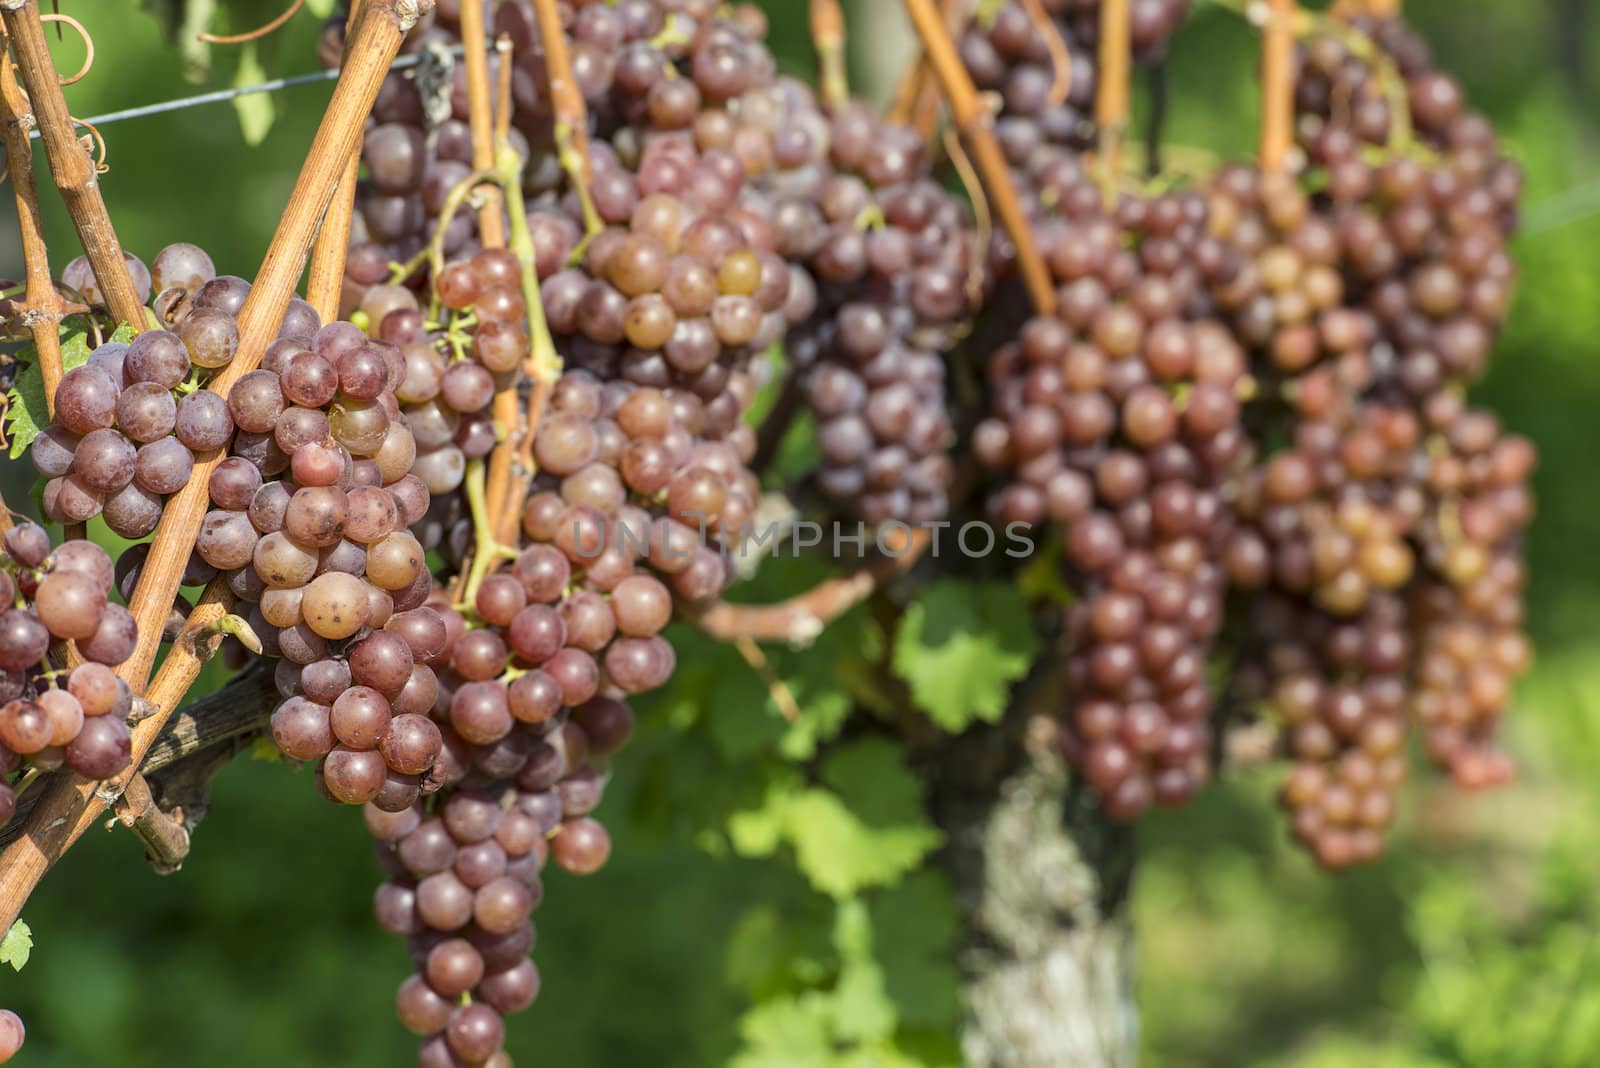 White Grapes in the Vineyard By Harvest Time